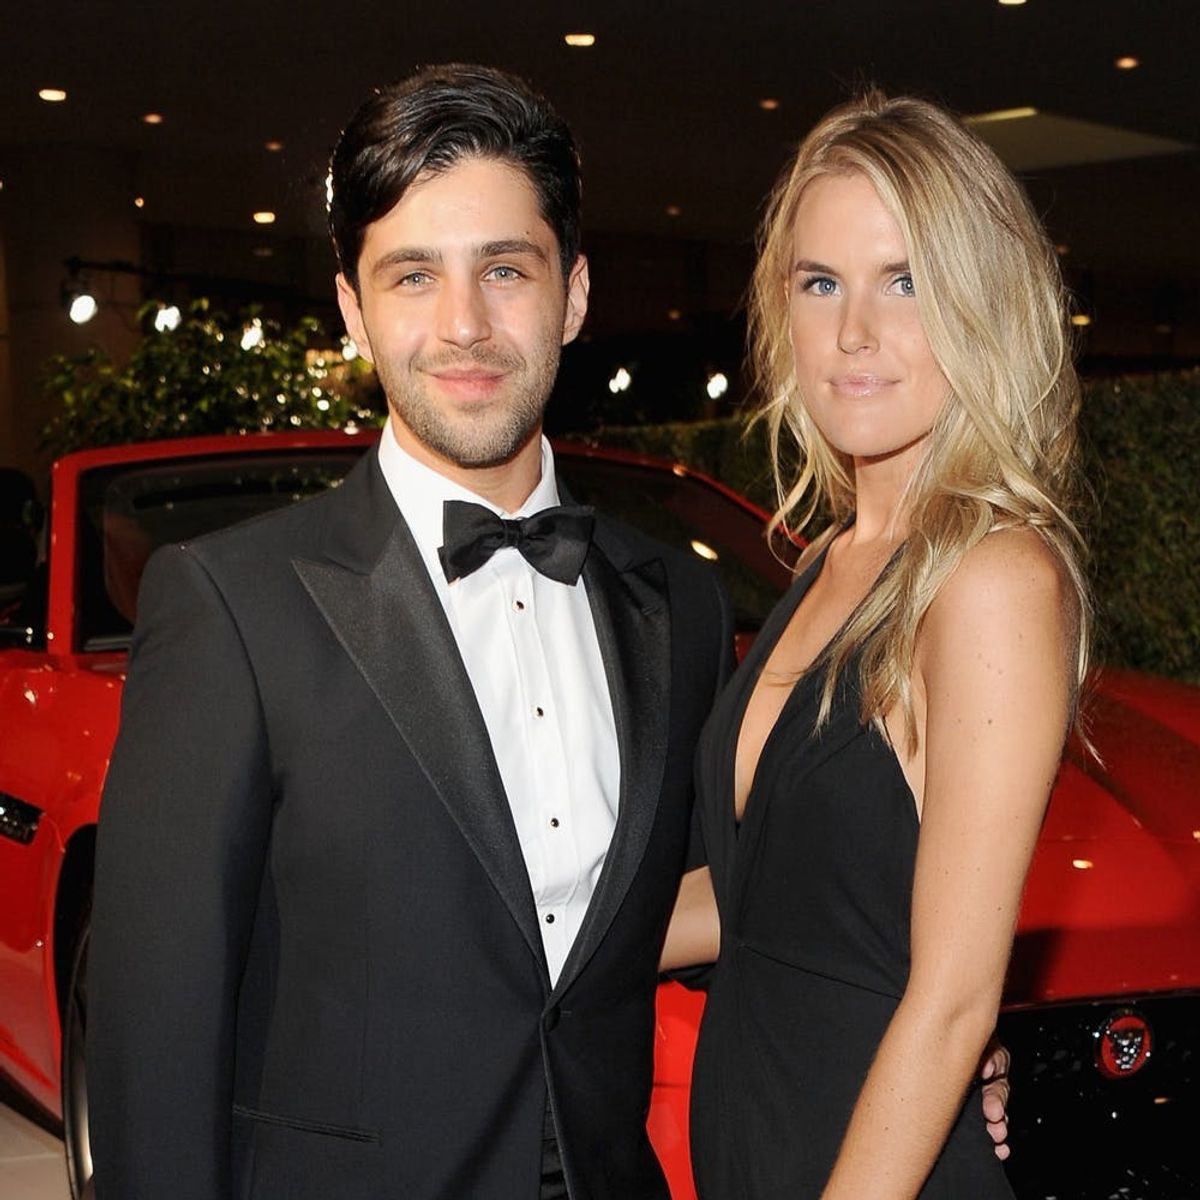 ‘Drake and Josh’ Star Josh Peck Is Expecting His First Child With Wife Paige O’Brien